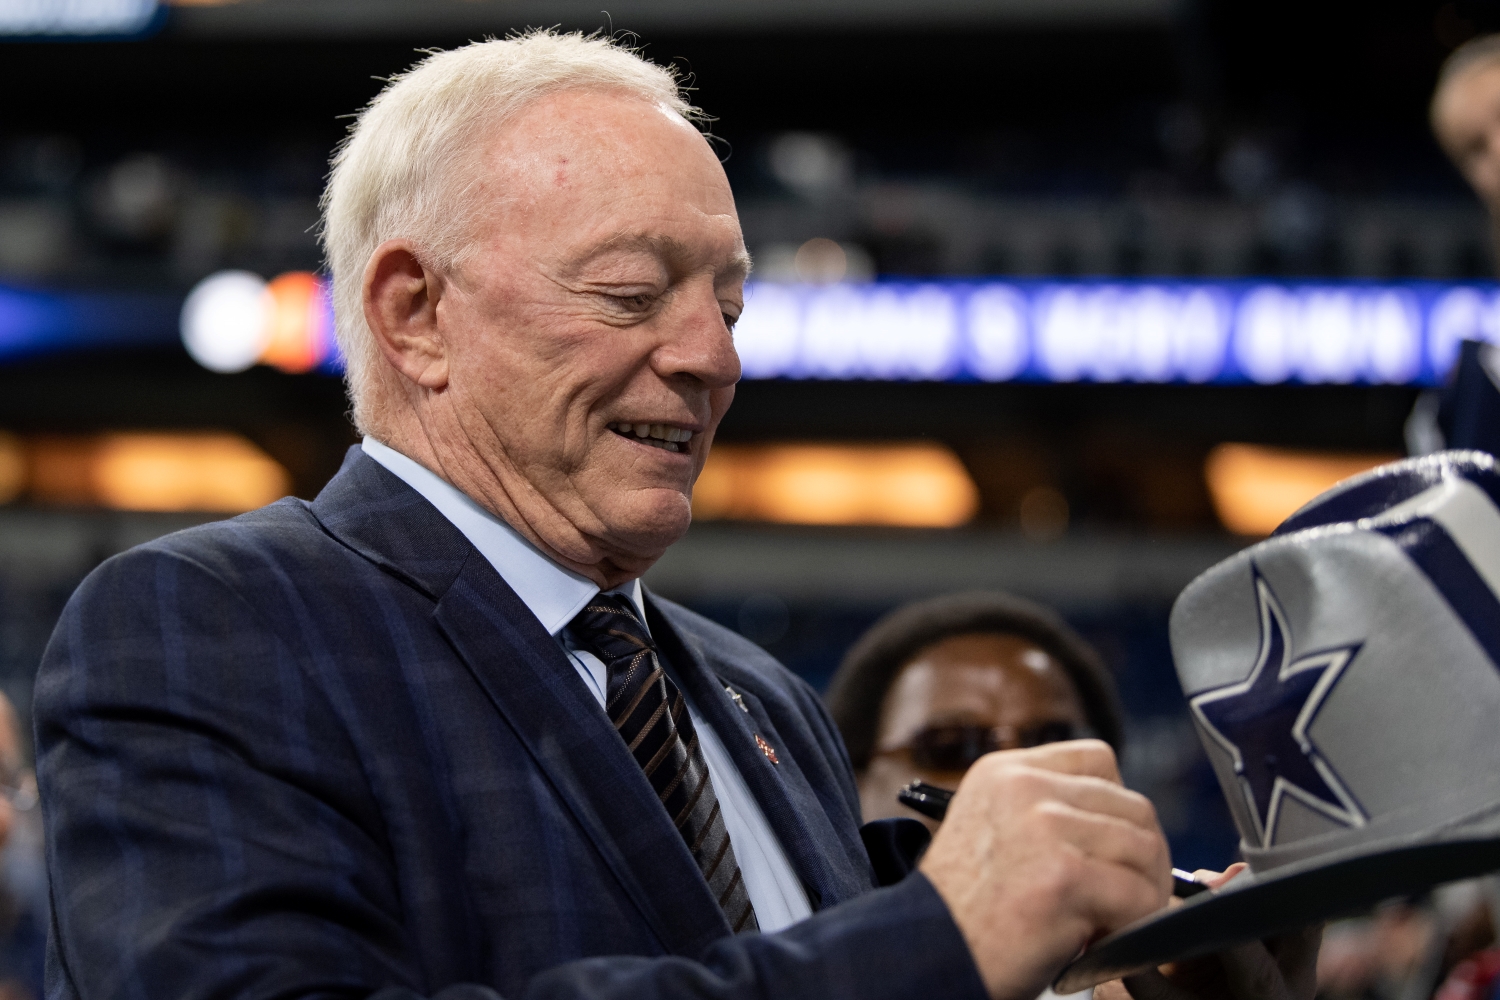 Dallas Cowboys owner Jerry Jones signs autographs before a game against the Indianapolis Colts from the 2018 season.